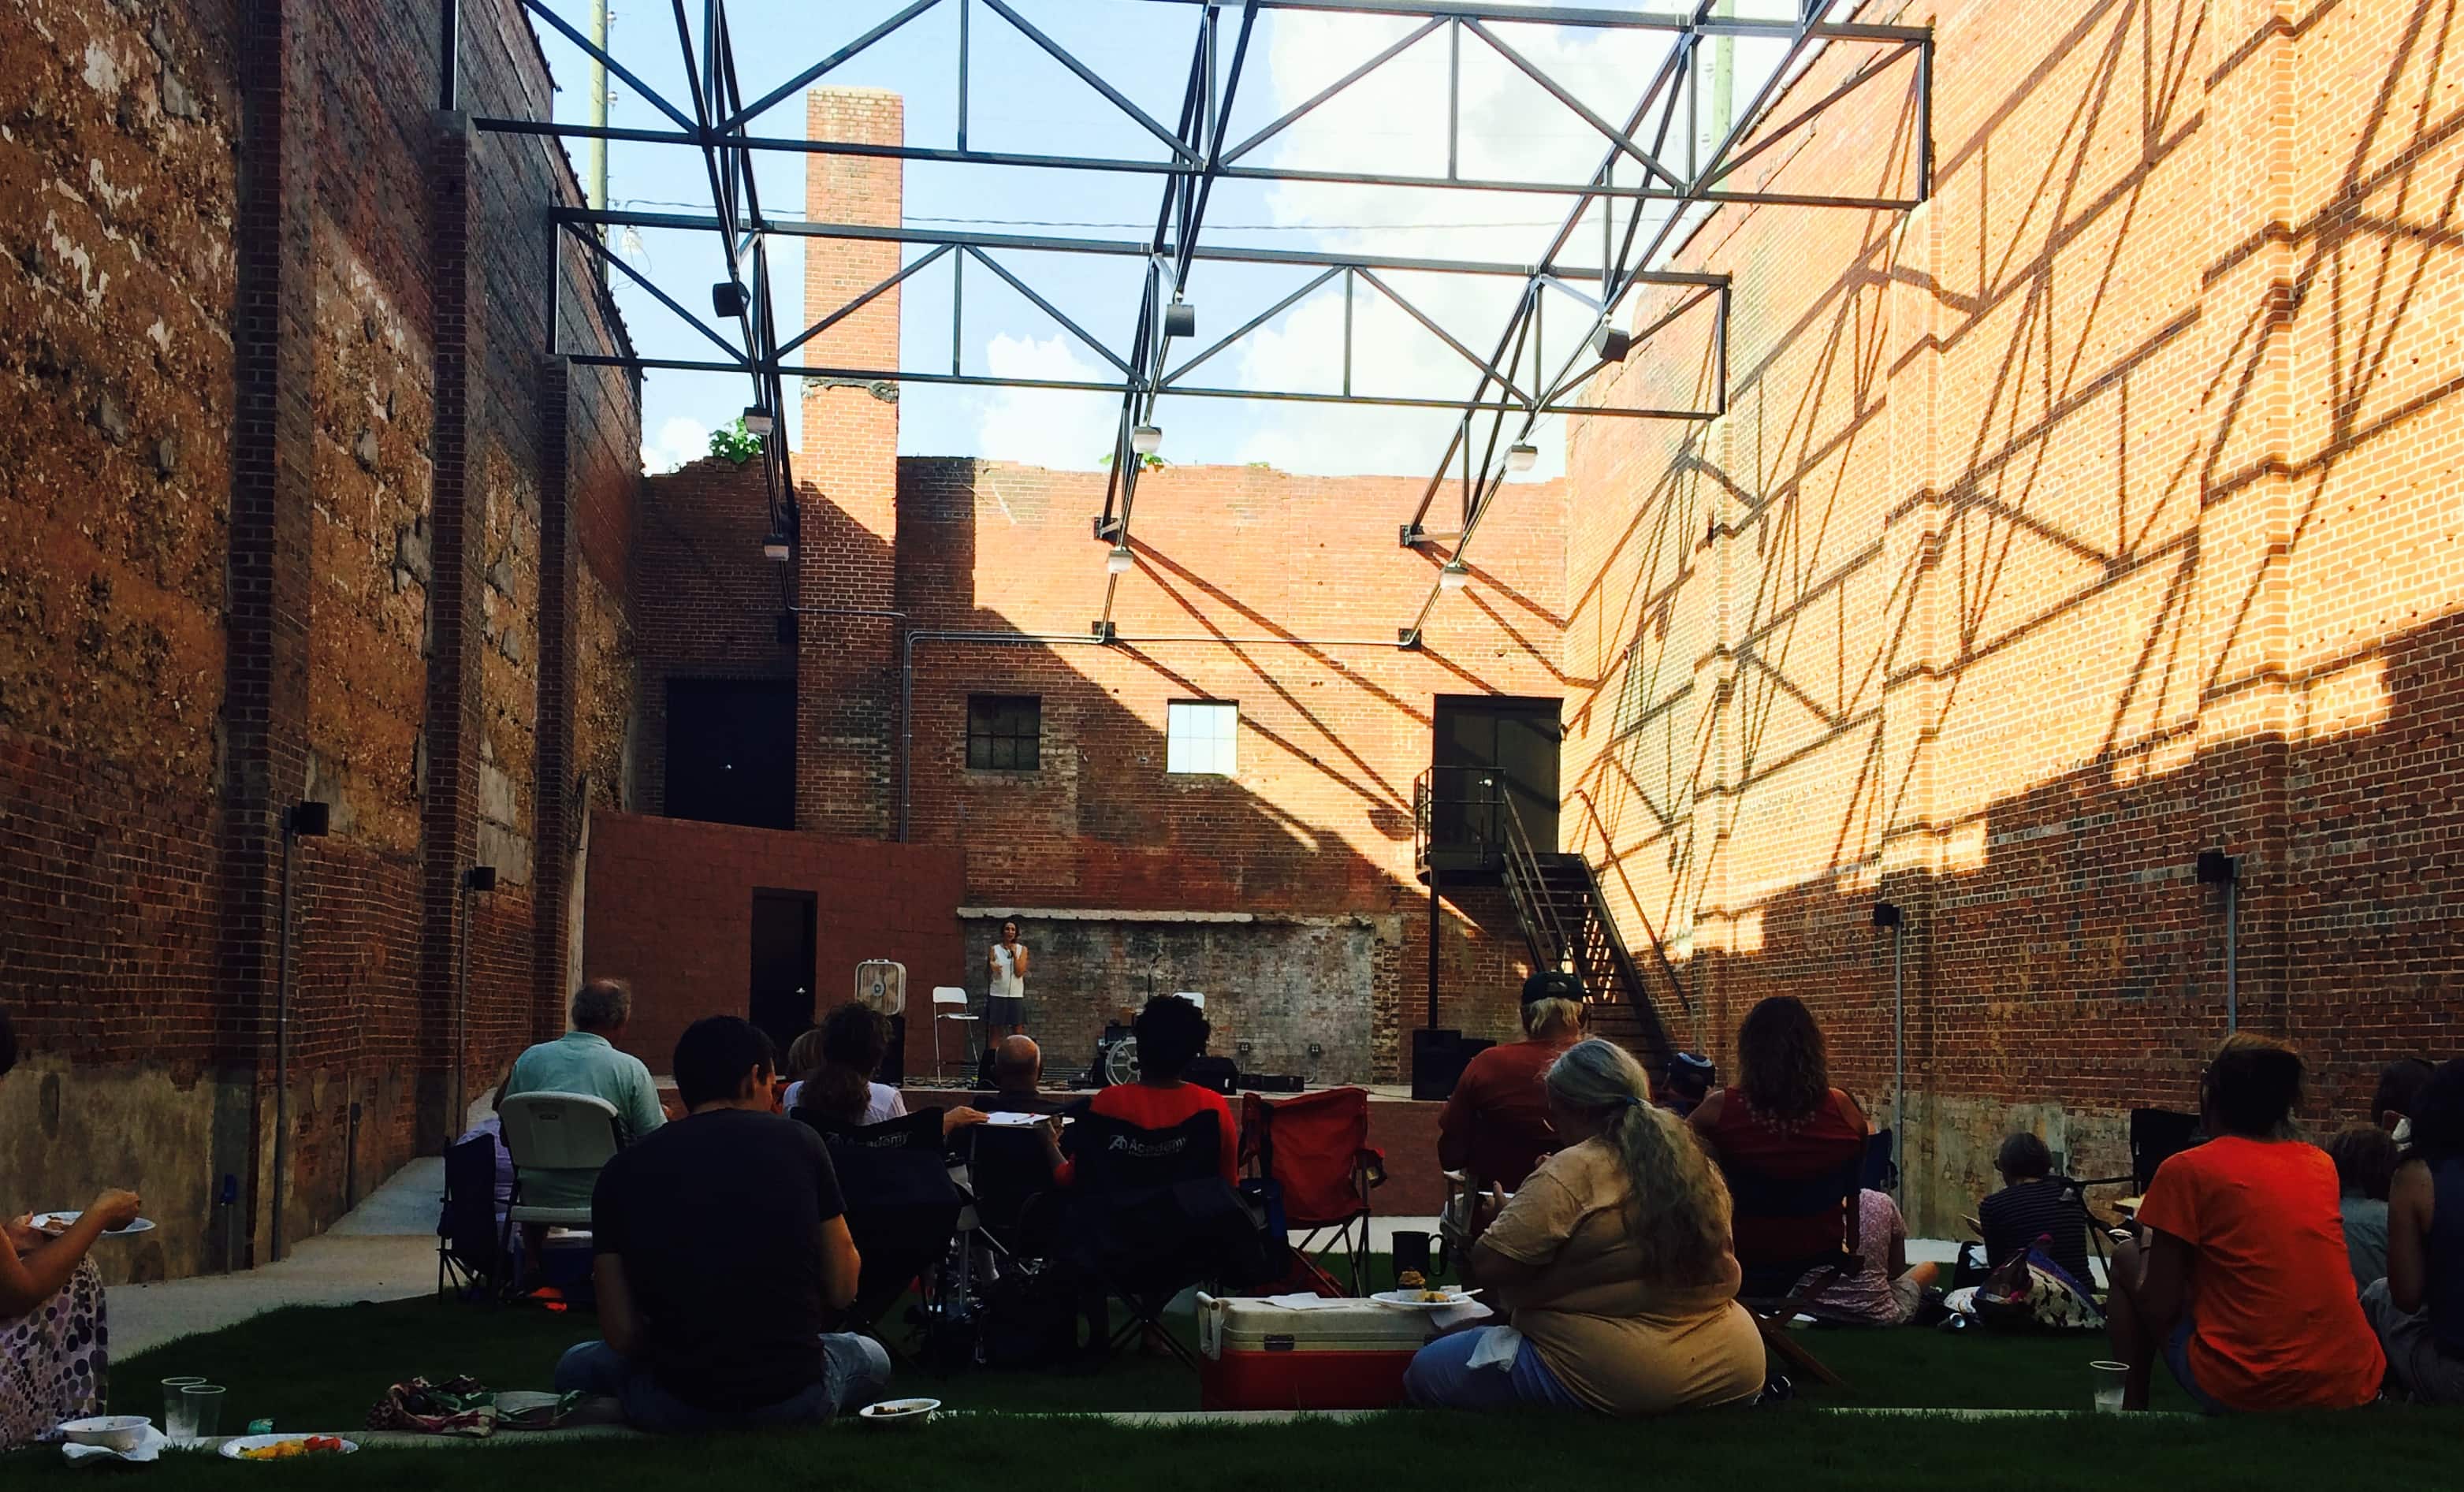 Isn't this architecture beautiful. I love the exposed brick in this open-air theatre and the tiered grass in the courtyard. It is perfect for concerts, speaking events, etc. It was a privilege to speak here about SLOW FOODS!